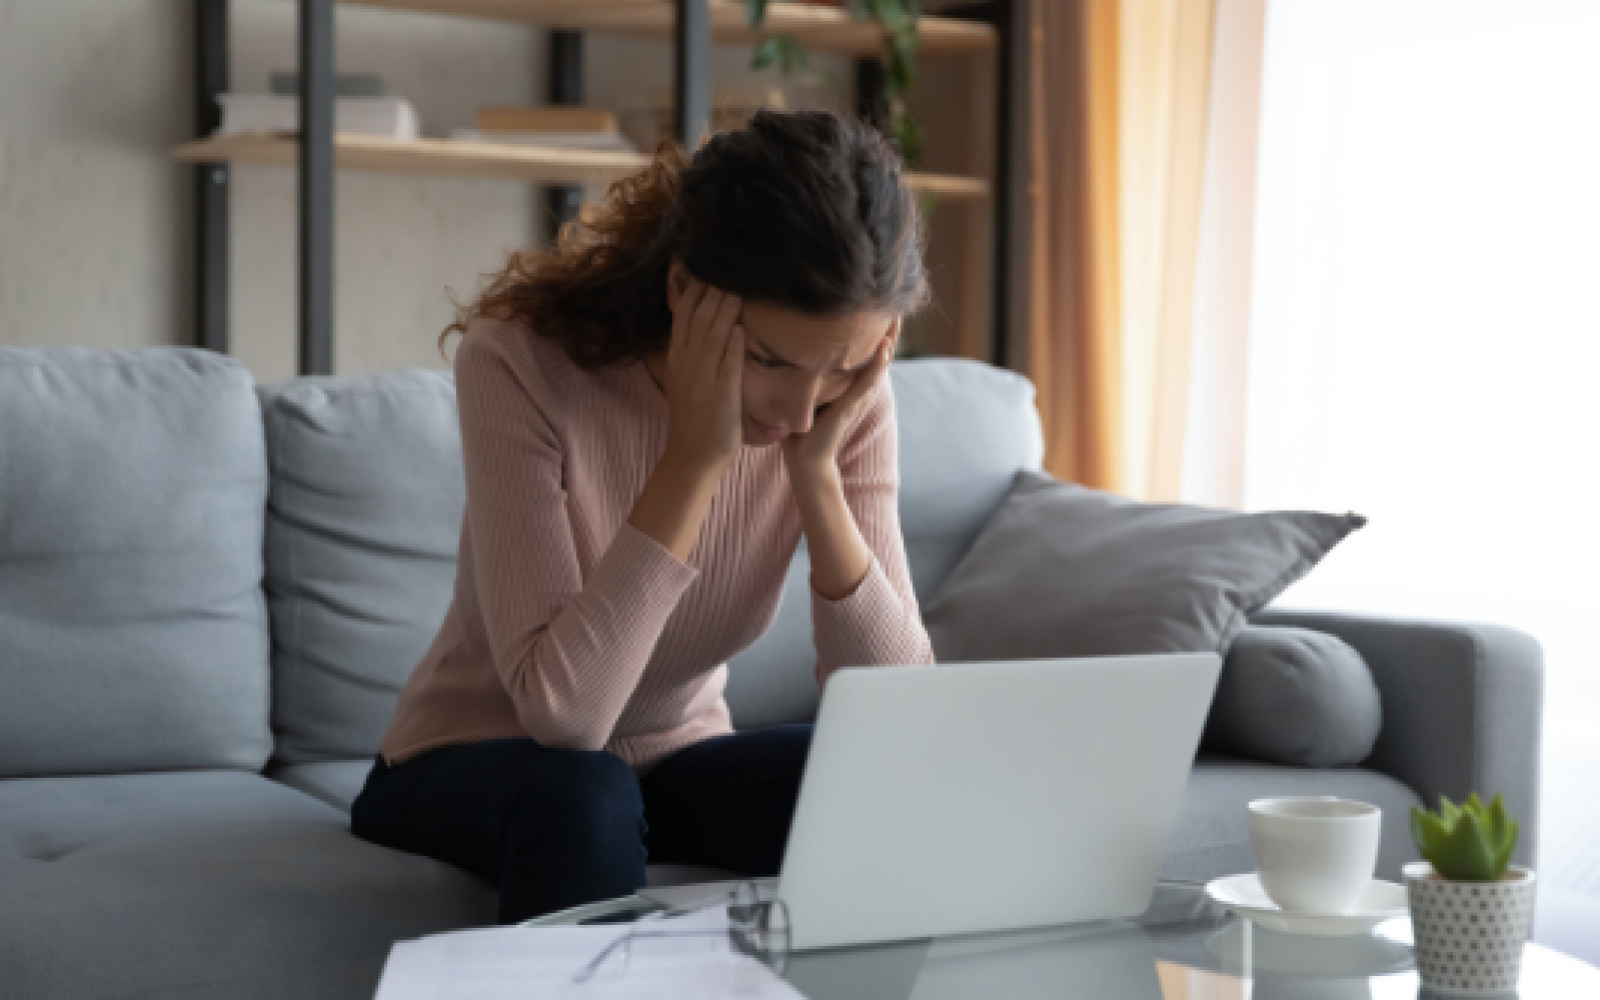 A woman sits in front of a laptop looking frustrated with her hands on her face weighing options between online-only lender and mortgage brokers.